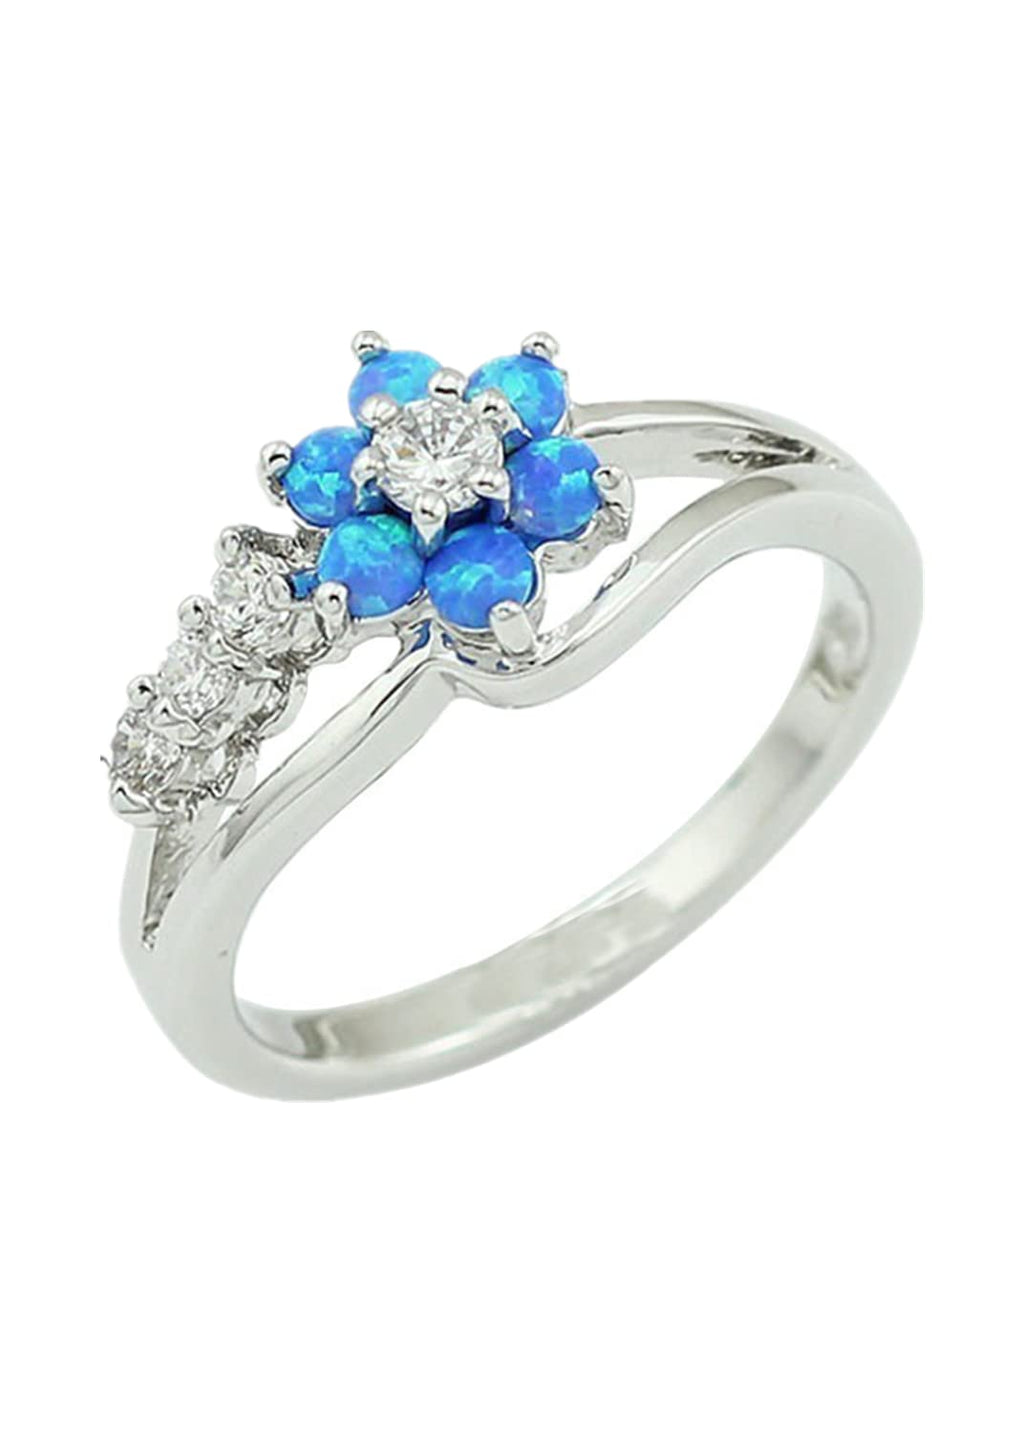 [Australia] - Pingyongchang Exquisite Round Cut White Fire Opal Stone Flower Women Opal Rings Diamond Zircon Female Jewelry Accessory Birthday Proposal Gift Bridal Engagement Party Band Ring Size 6-10 Blue Size10 